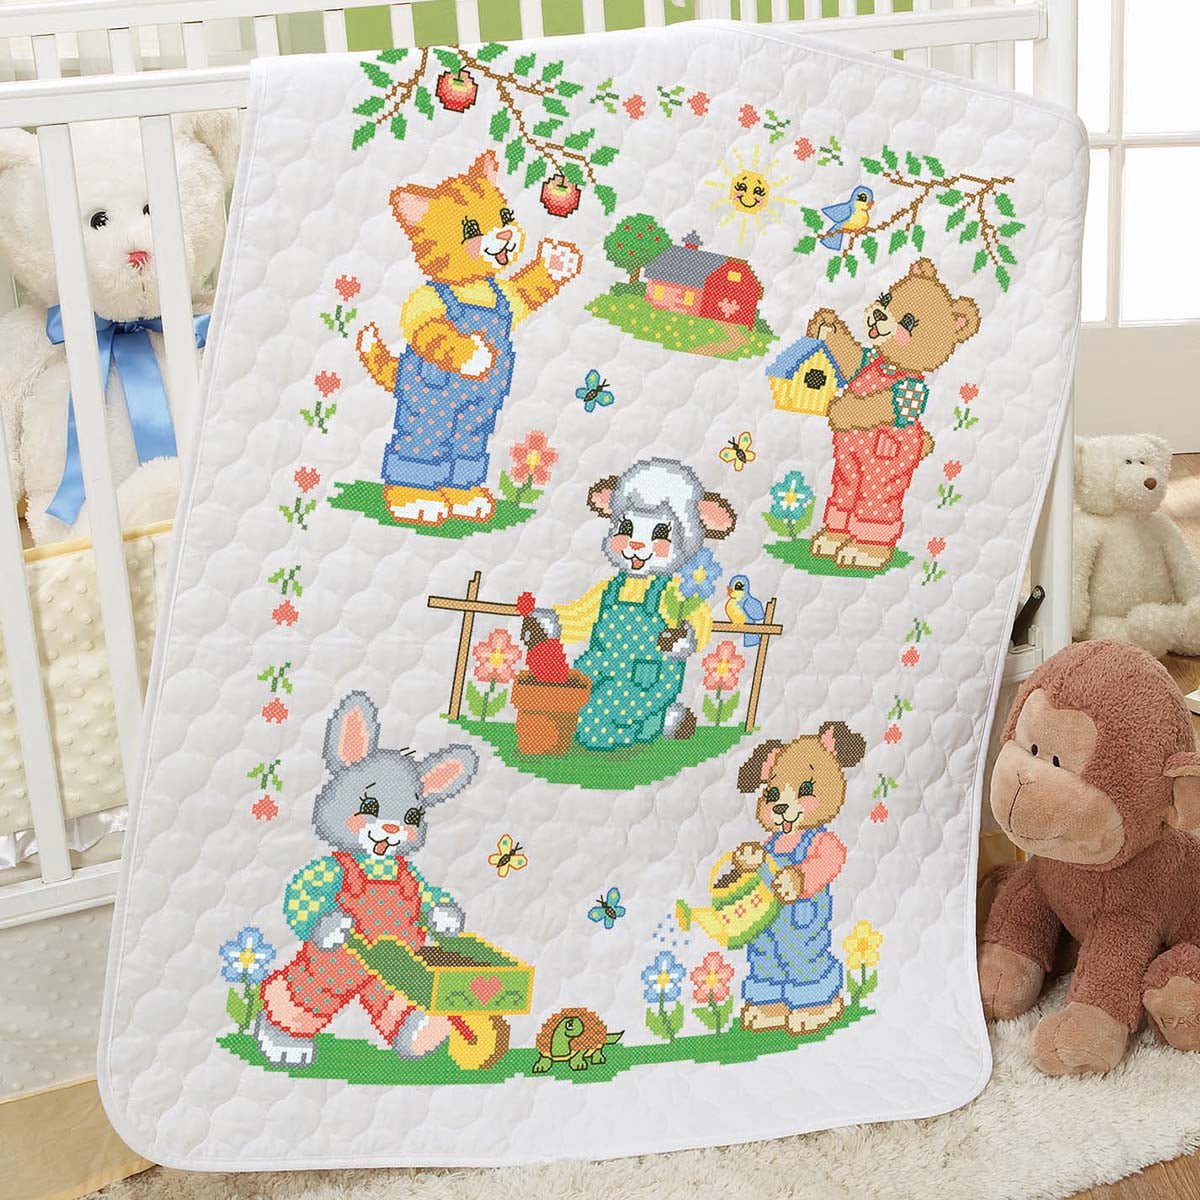 Savannah Baby Quilt Kit - Dimensions - Stamped Cross Stitch Kits at Weekend  Kits